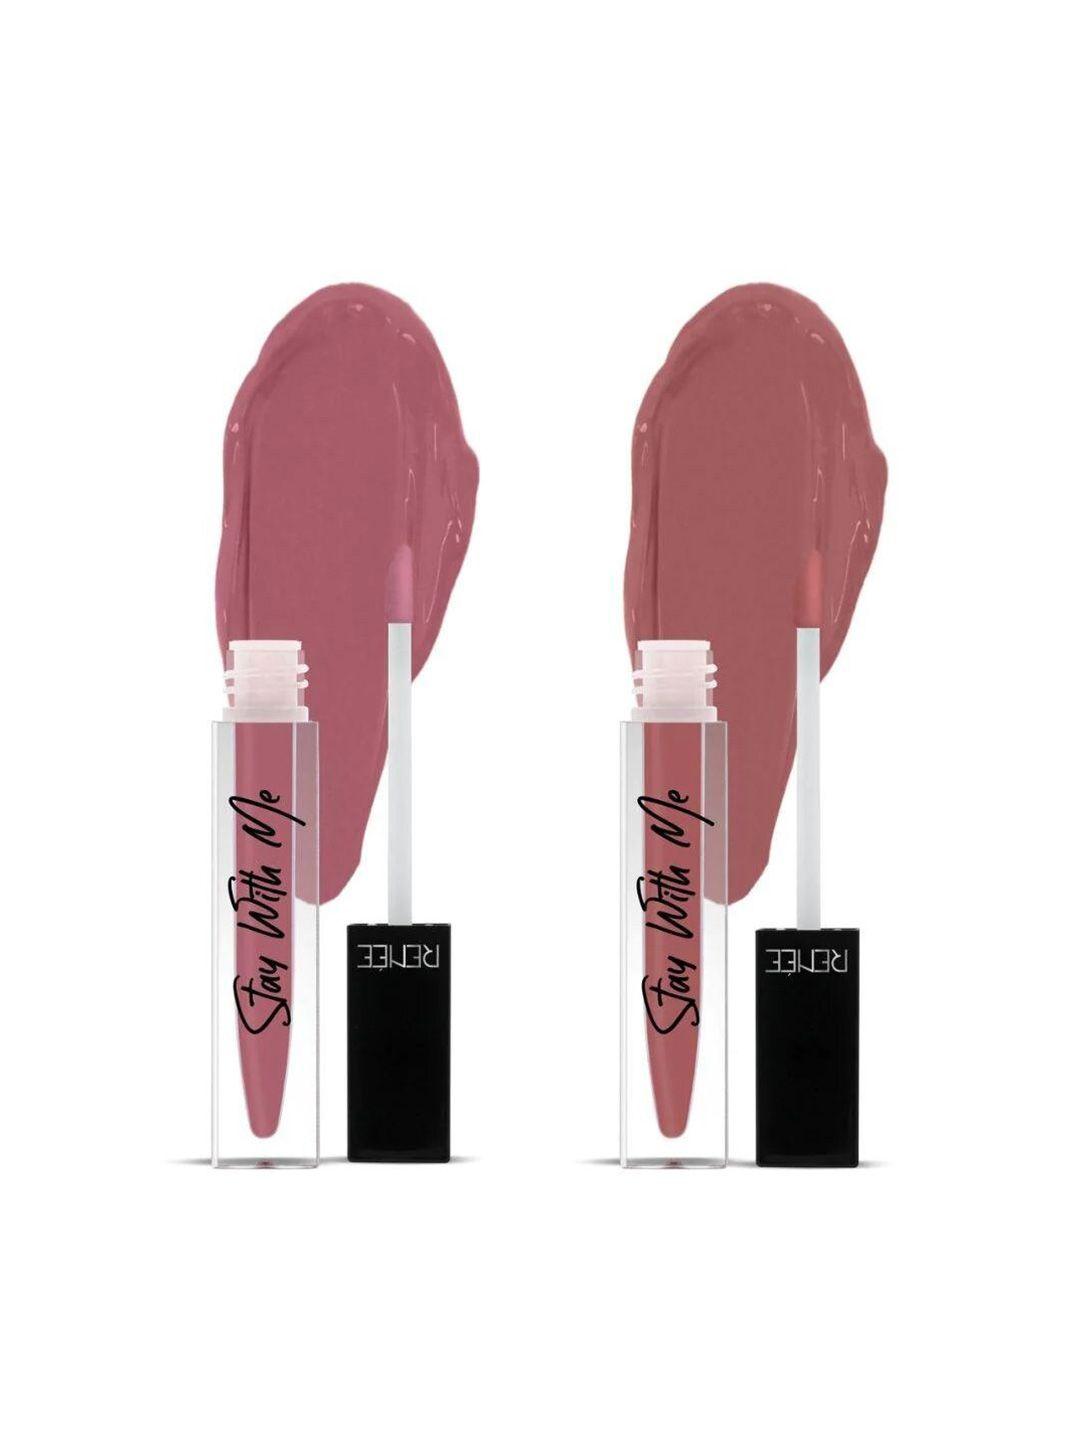 renee set of 2 stay with me matte lipsticks 5ml each - awe for mauve & desire for brown